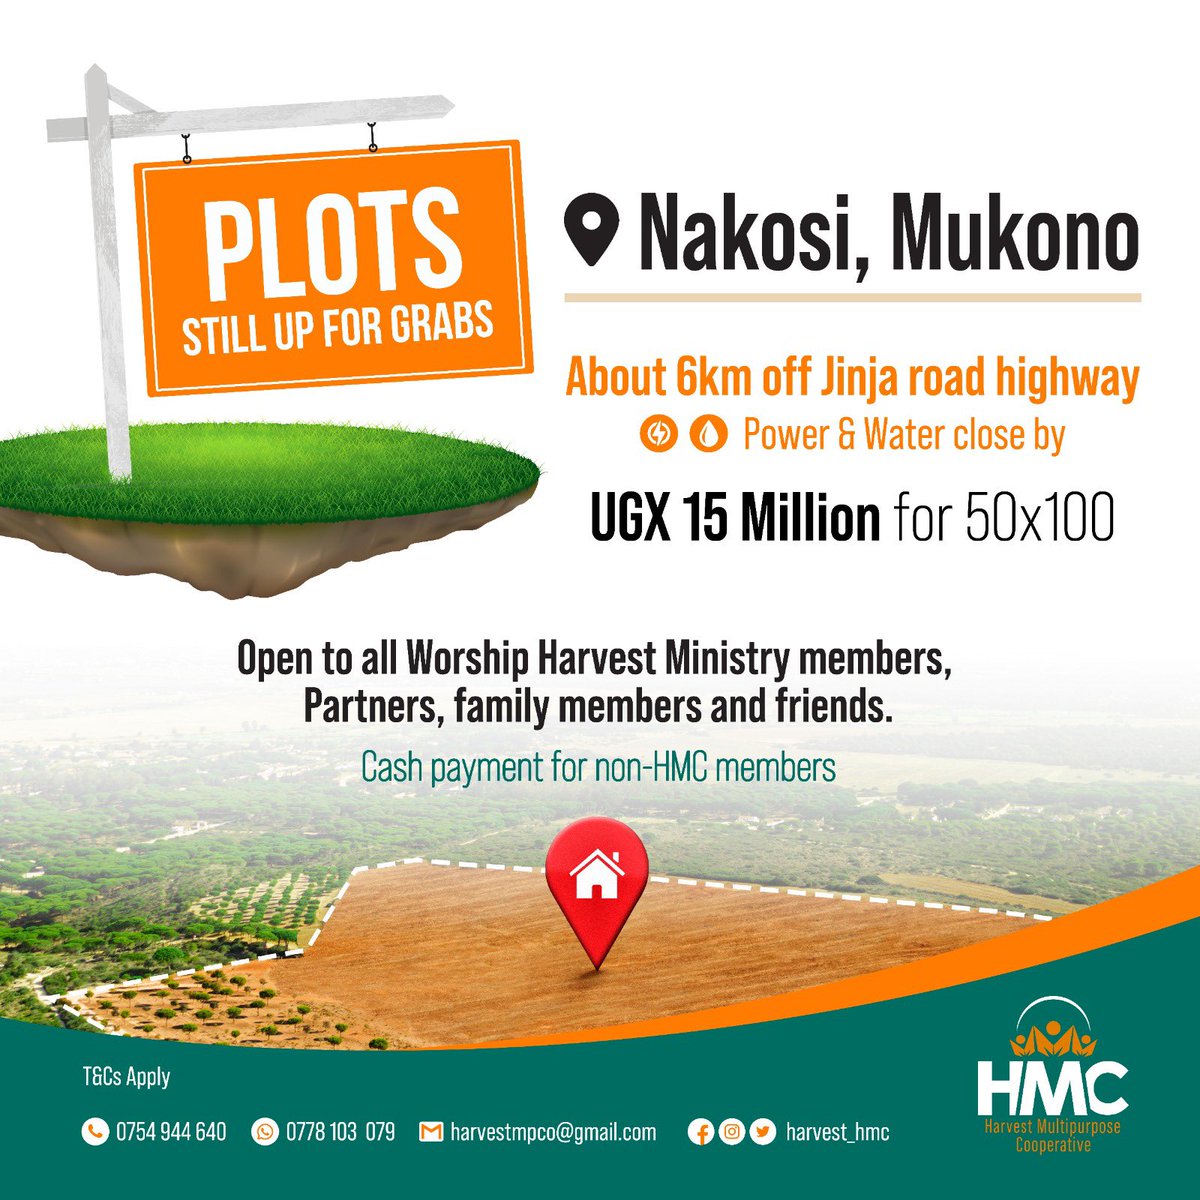 Greetings, members and friends of #WorshipHarvest,
We still have land available in our Mukono estate. 

Contact us today for more information or to book or buy your plot. 

#HMC #FinancialFreedomForGenerations #SecureLand